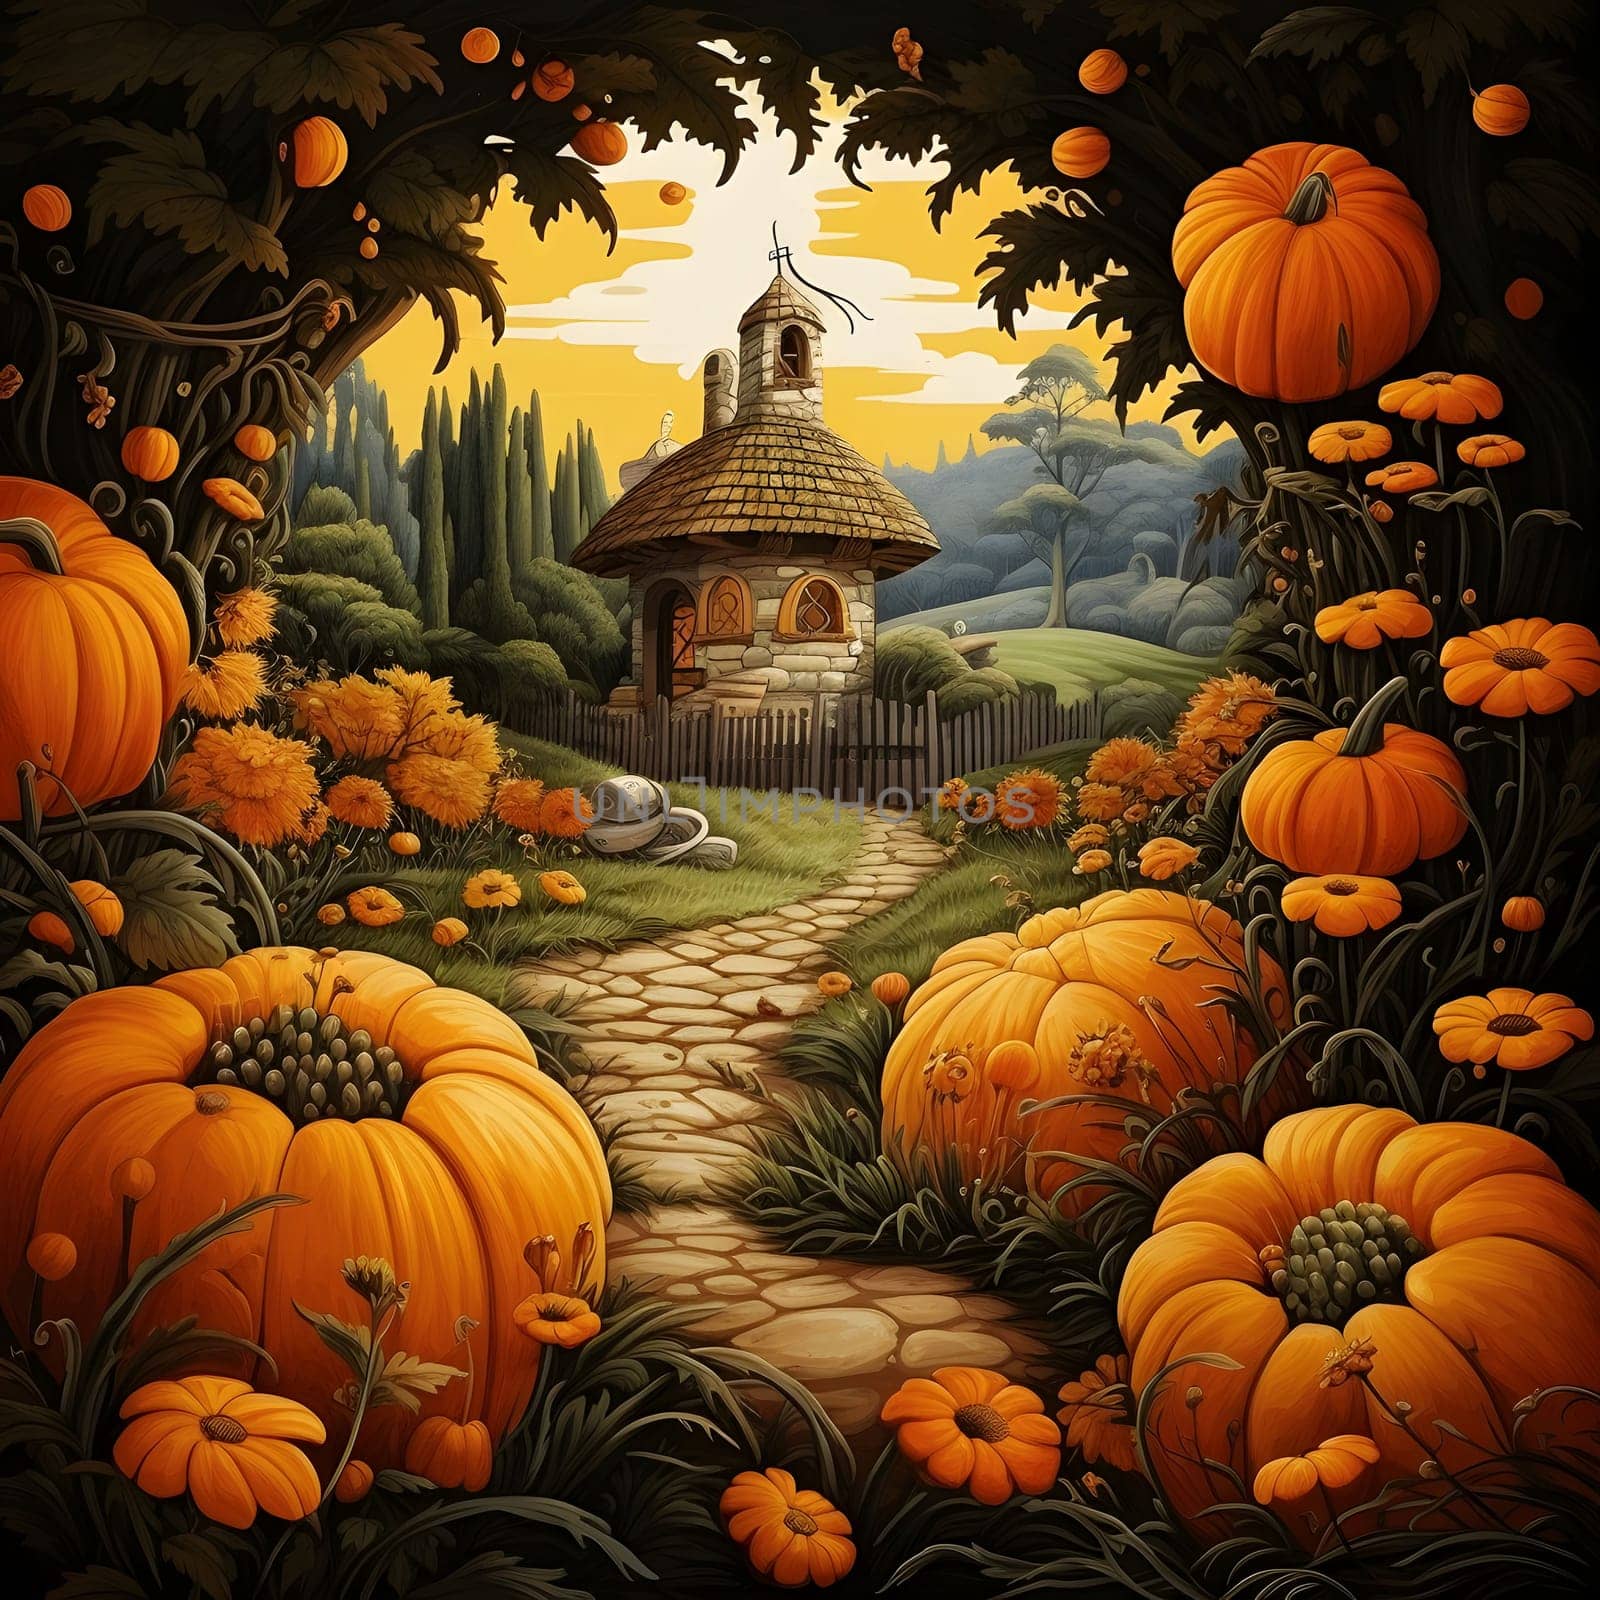 Illustration of stone tiny house around pumpkins, flowers, vegetation. Pumpkin as a dish of thanksgiving for the harvest. An atmosphere of joy and celebration.